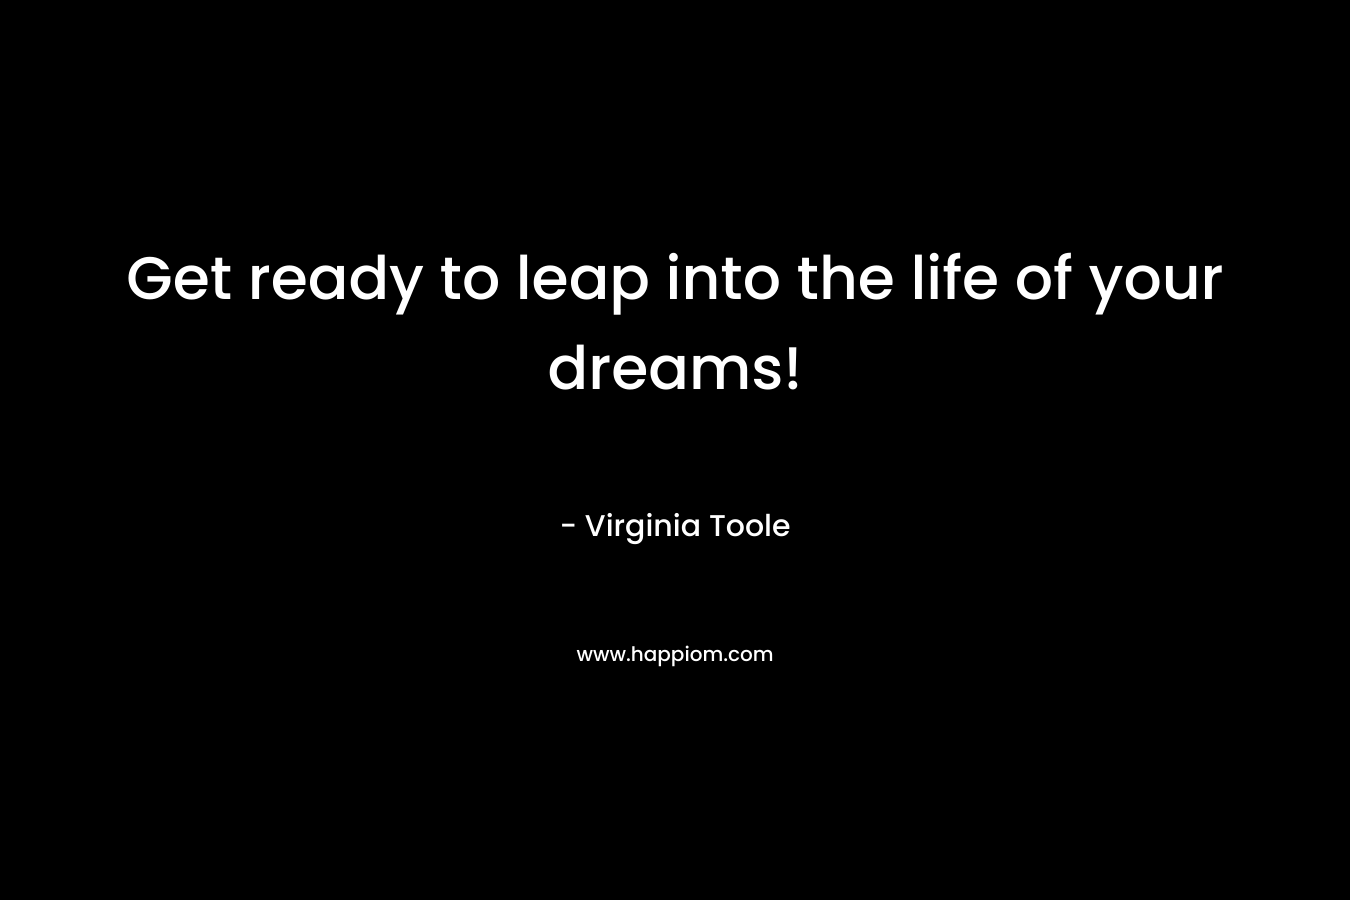 Get ready to leap into the life of your dreams!